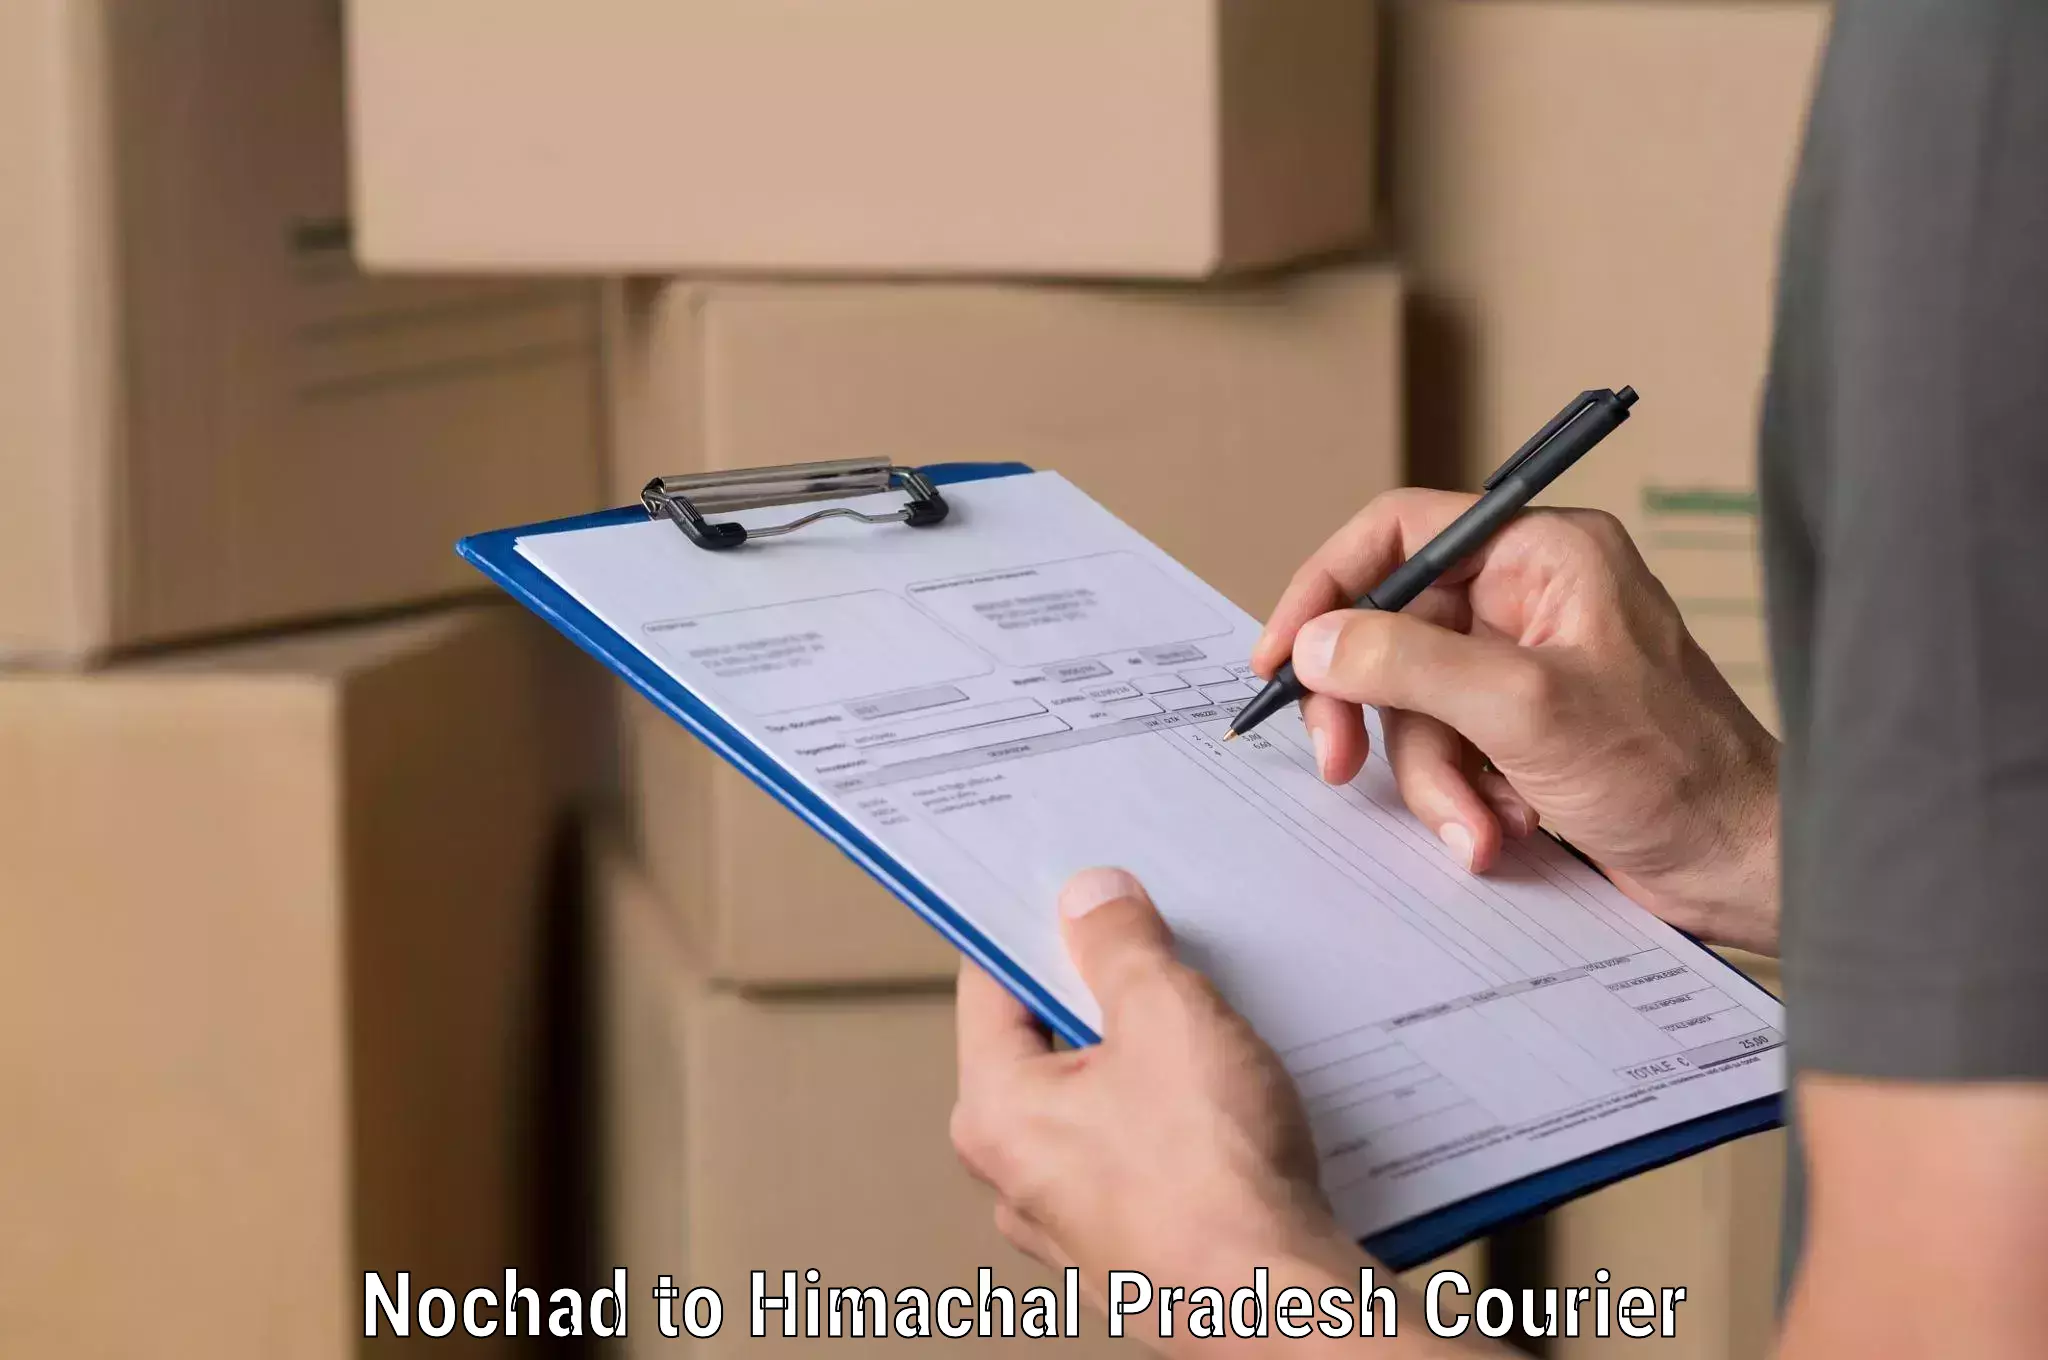 State-of-the-art courier technology Nochad to Himachal Pradesh